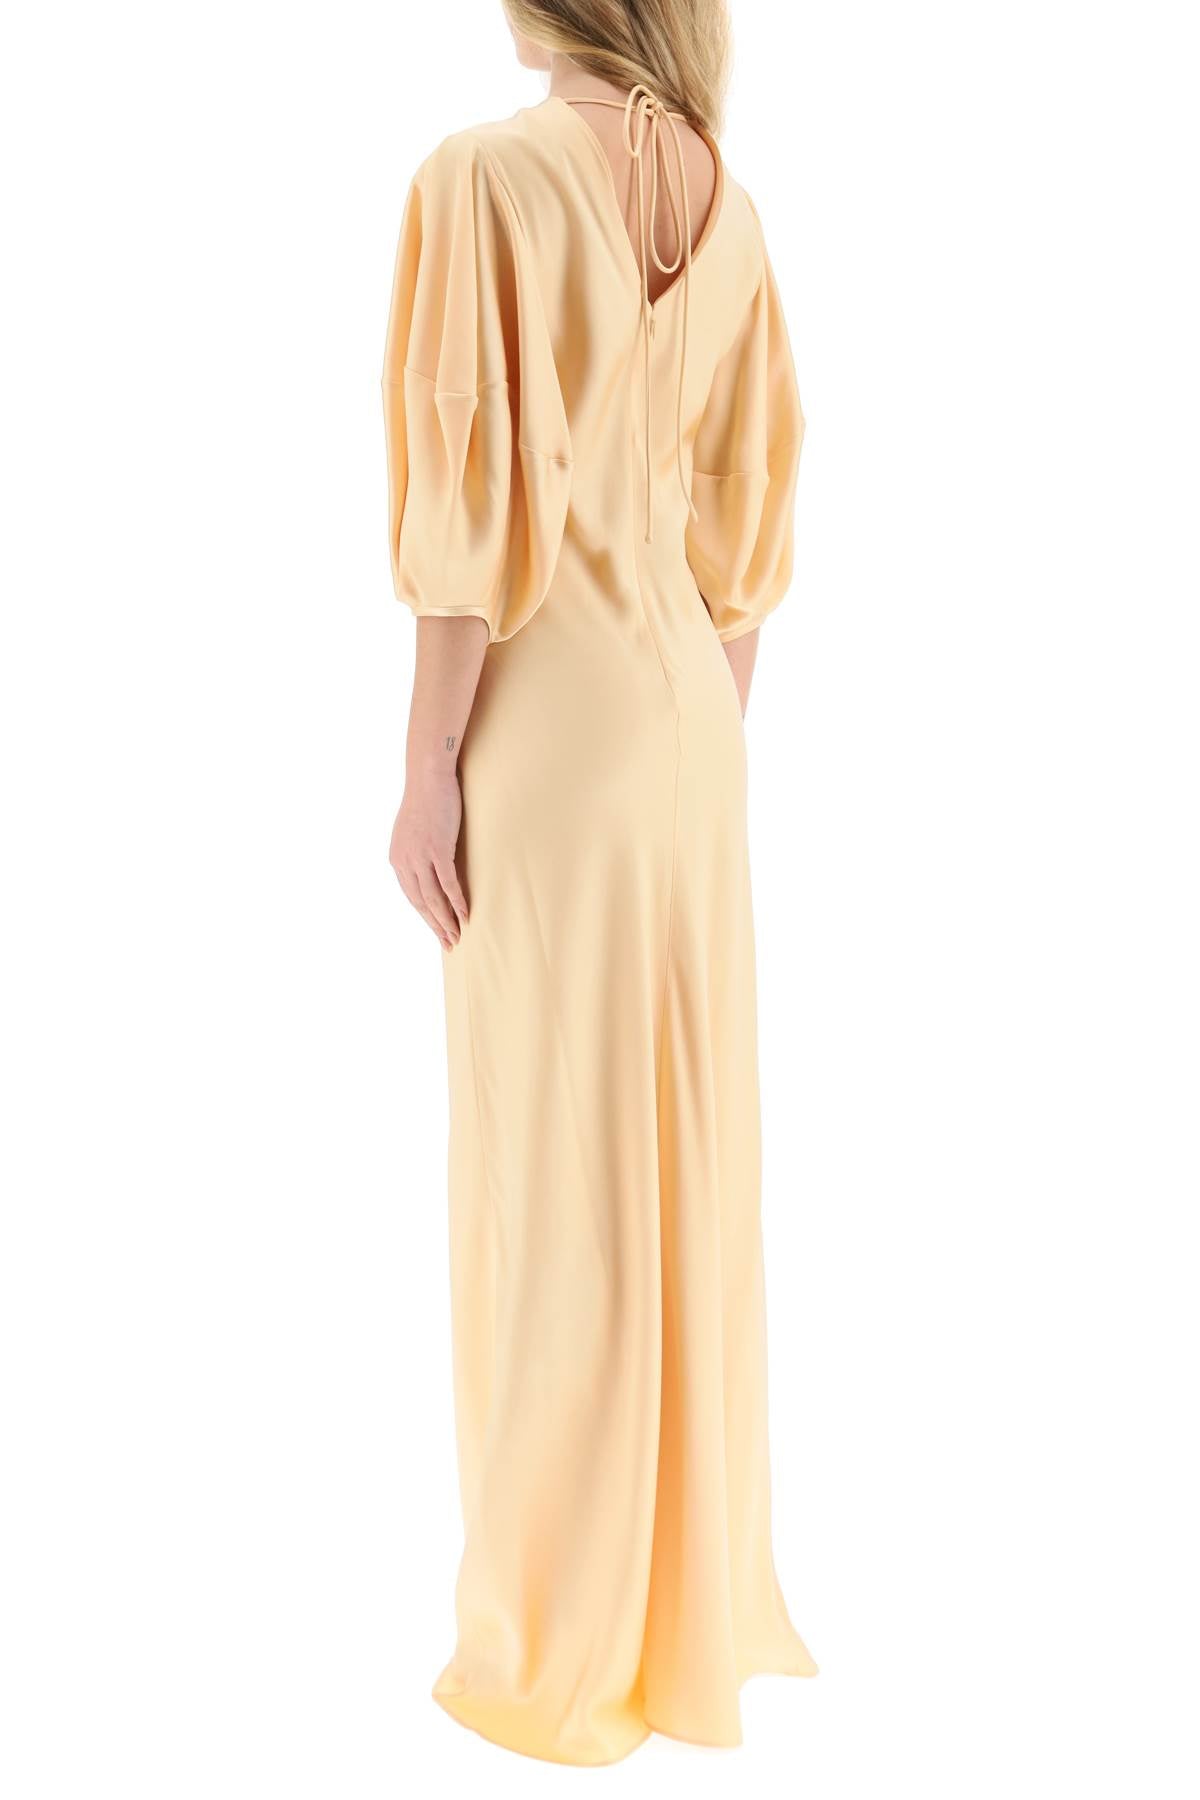 Stella mccartney satin maxi dress with cut-out ring detail-2